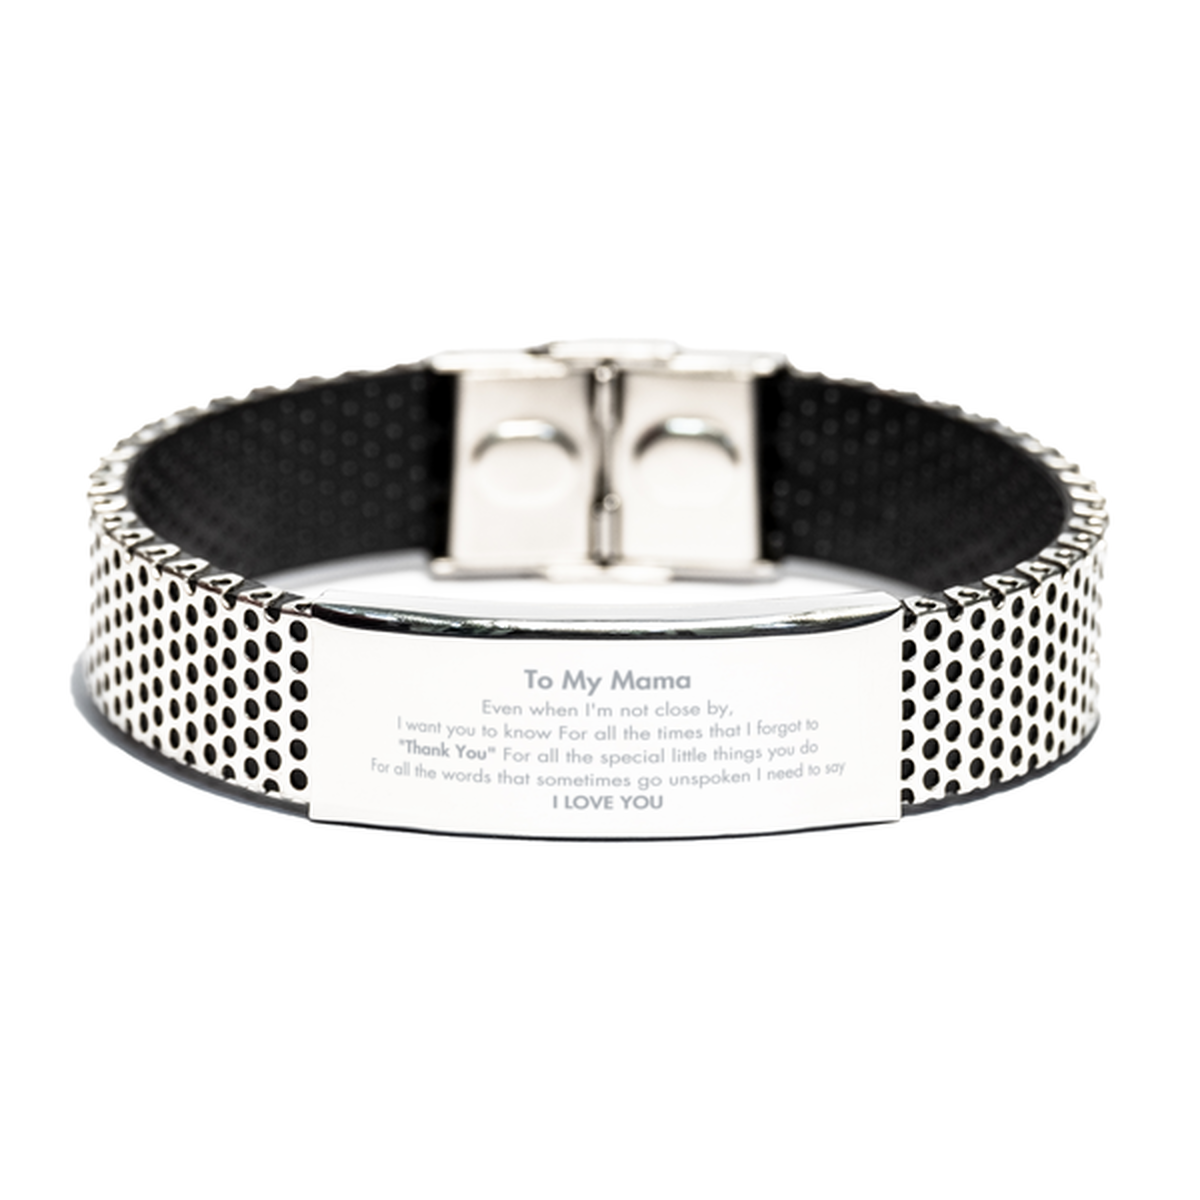 Thank You Gifts for Mama, Keepsake Stainless Steel Bracelet Gifts for Mama Birthday Mother's day Father's Day Mama For all the words That sometimes go unspoken I need to say I LOVE YOU